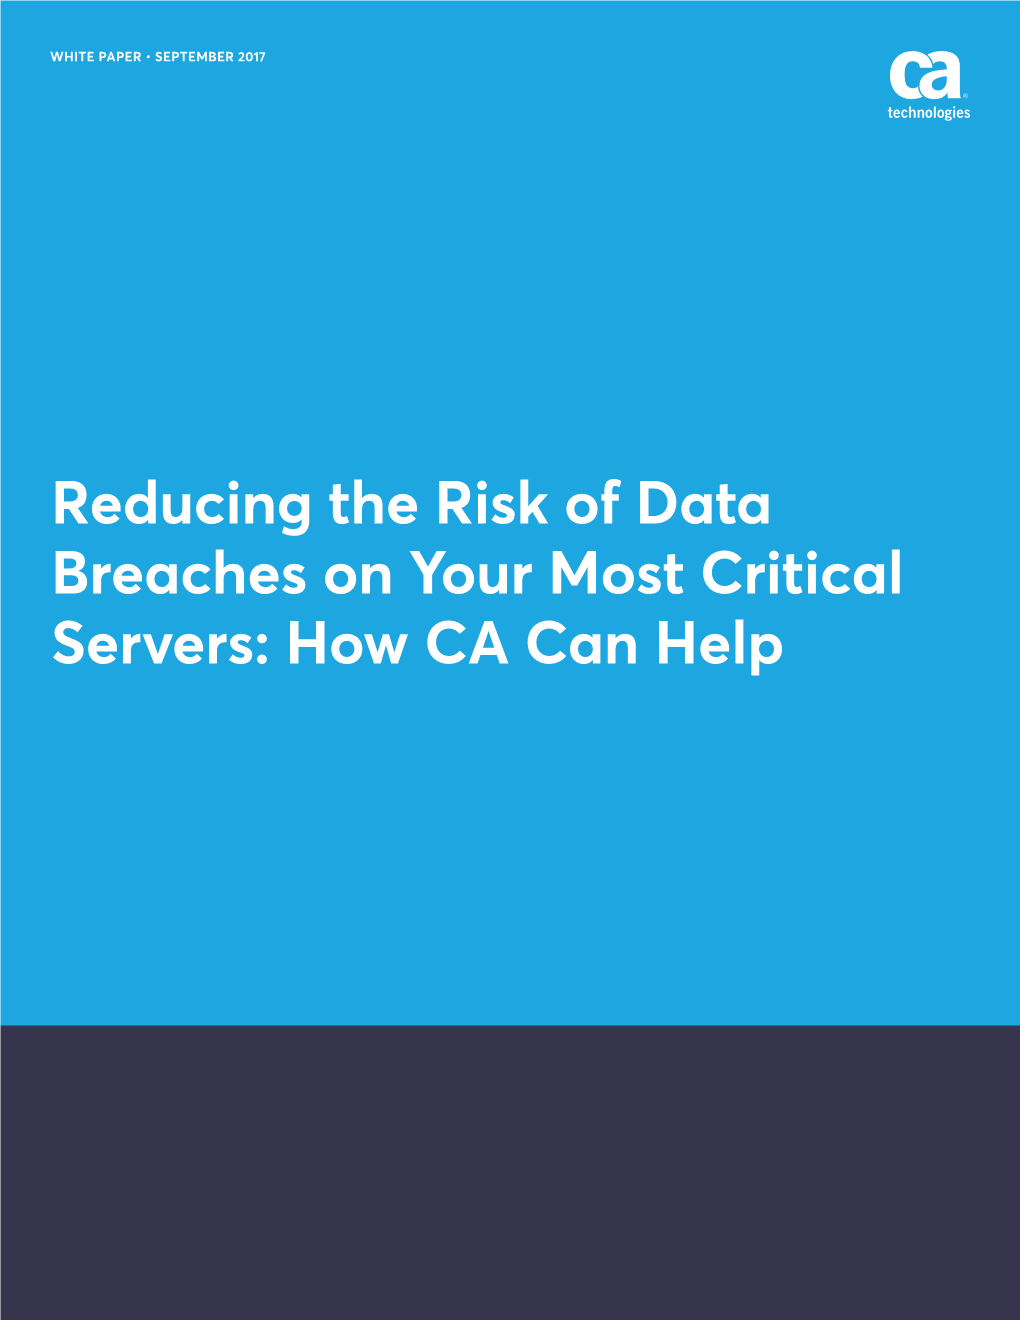 Reducing the Risk of Data Breaches on Your Most Critical Servers